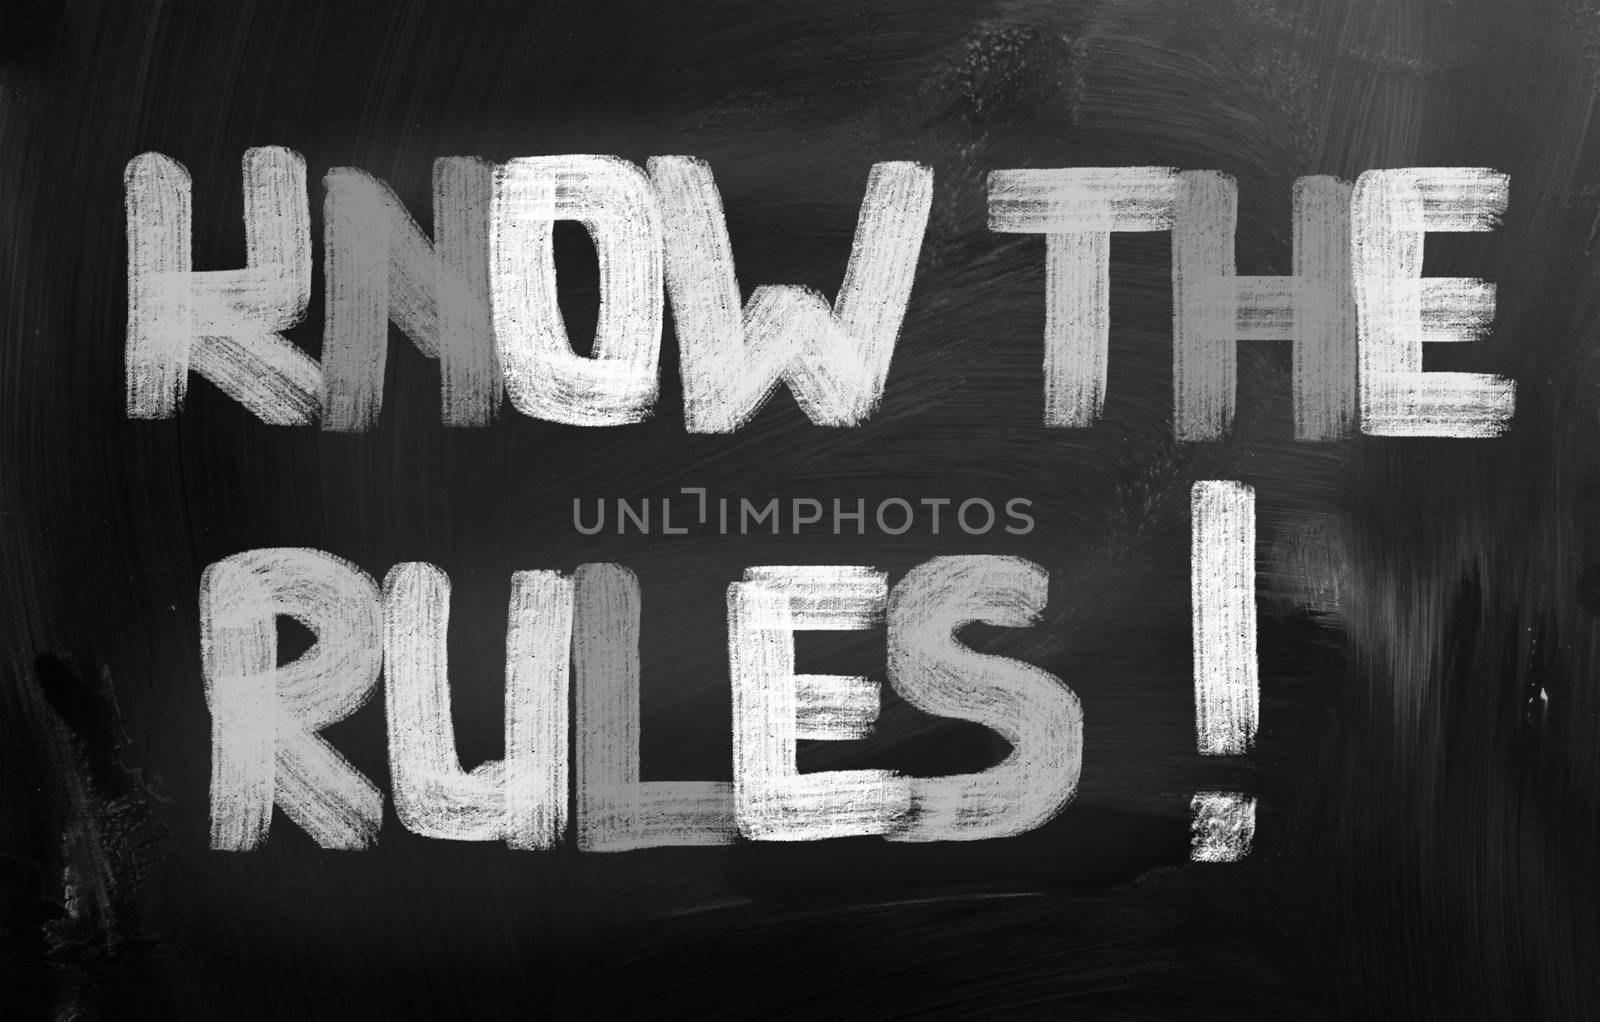 Know The Rules Concept